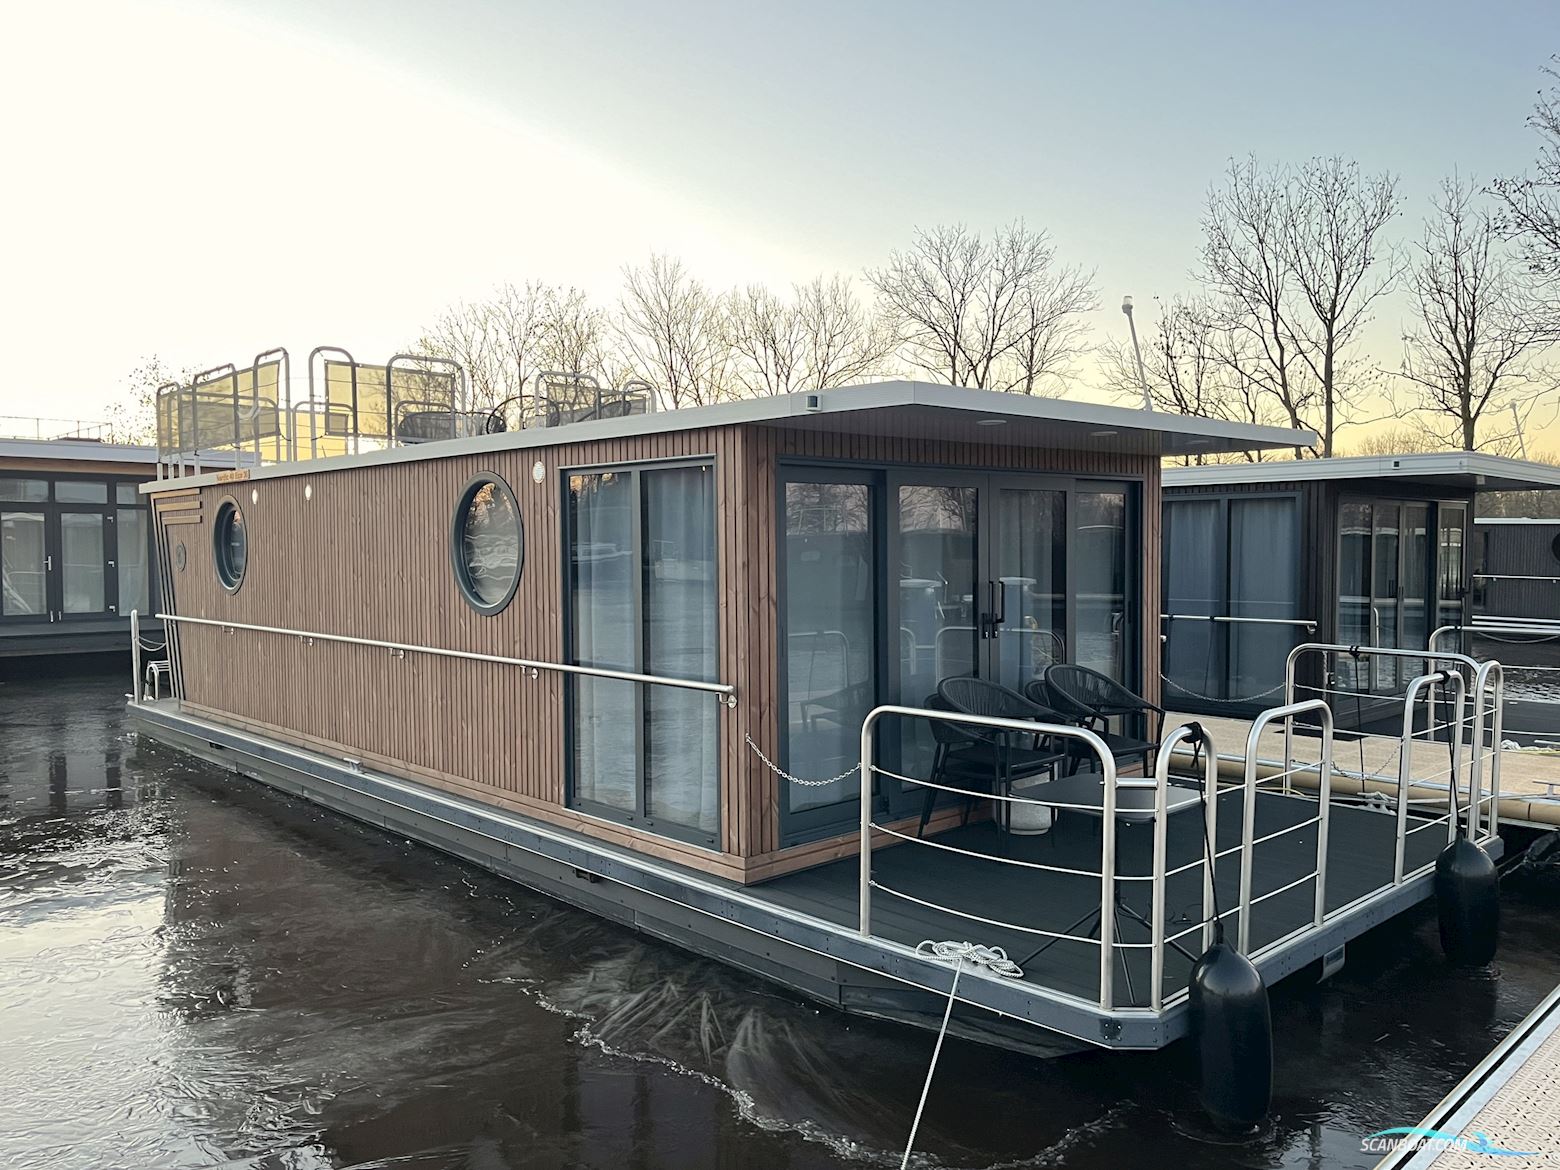 Nordic 40 Met Ligplaats NS 40 Eco 36m2 Houseboat Live a board / River boat 2023, with Yamaha engine, The Netherlands